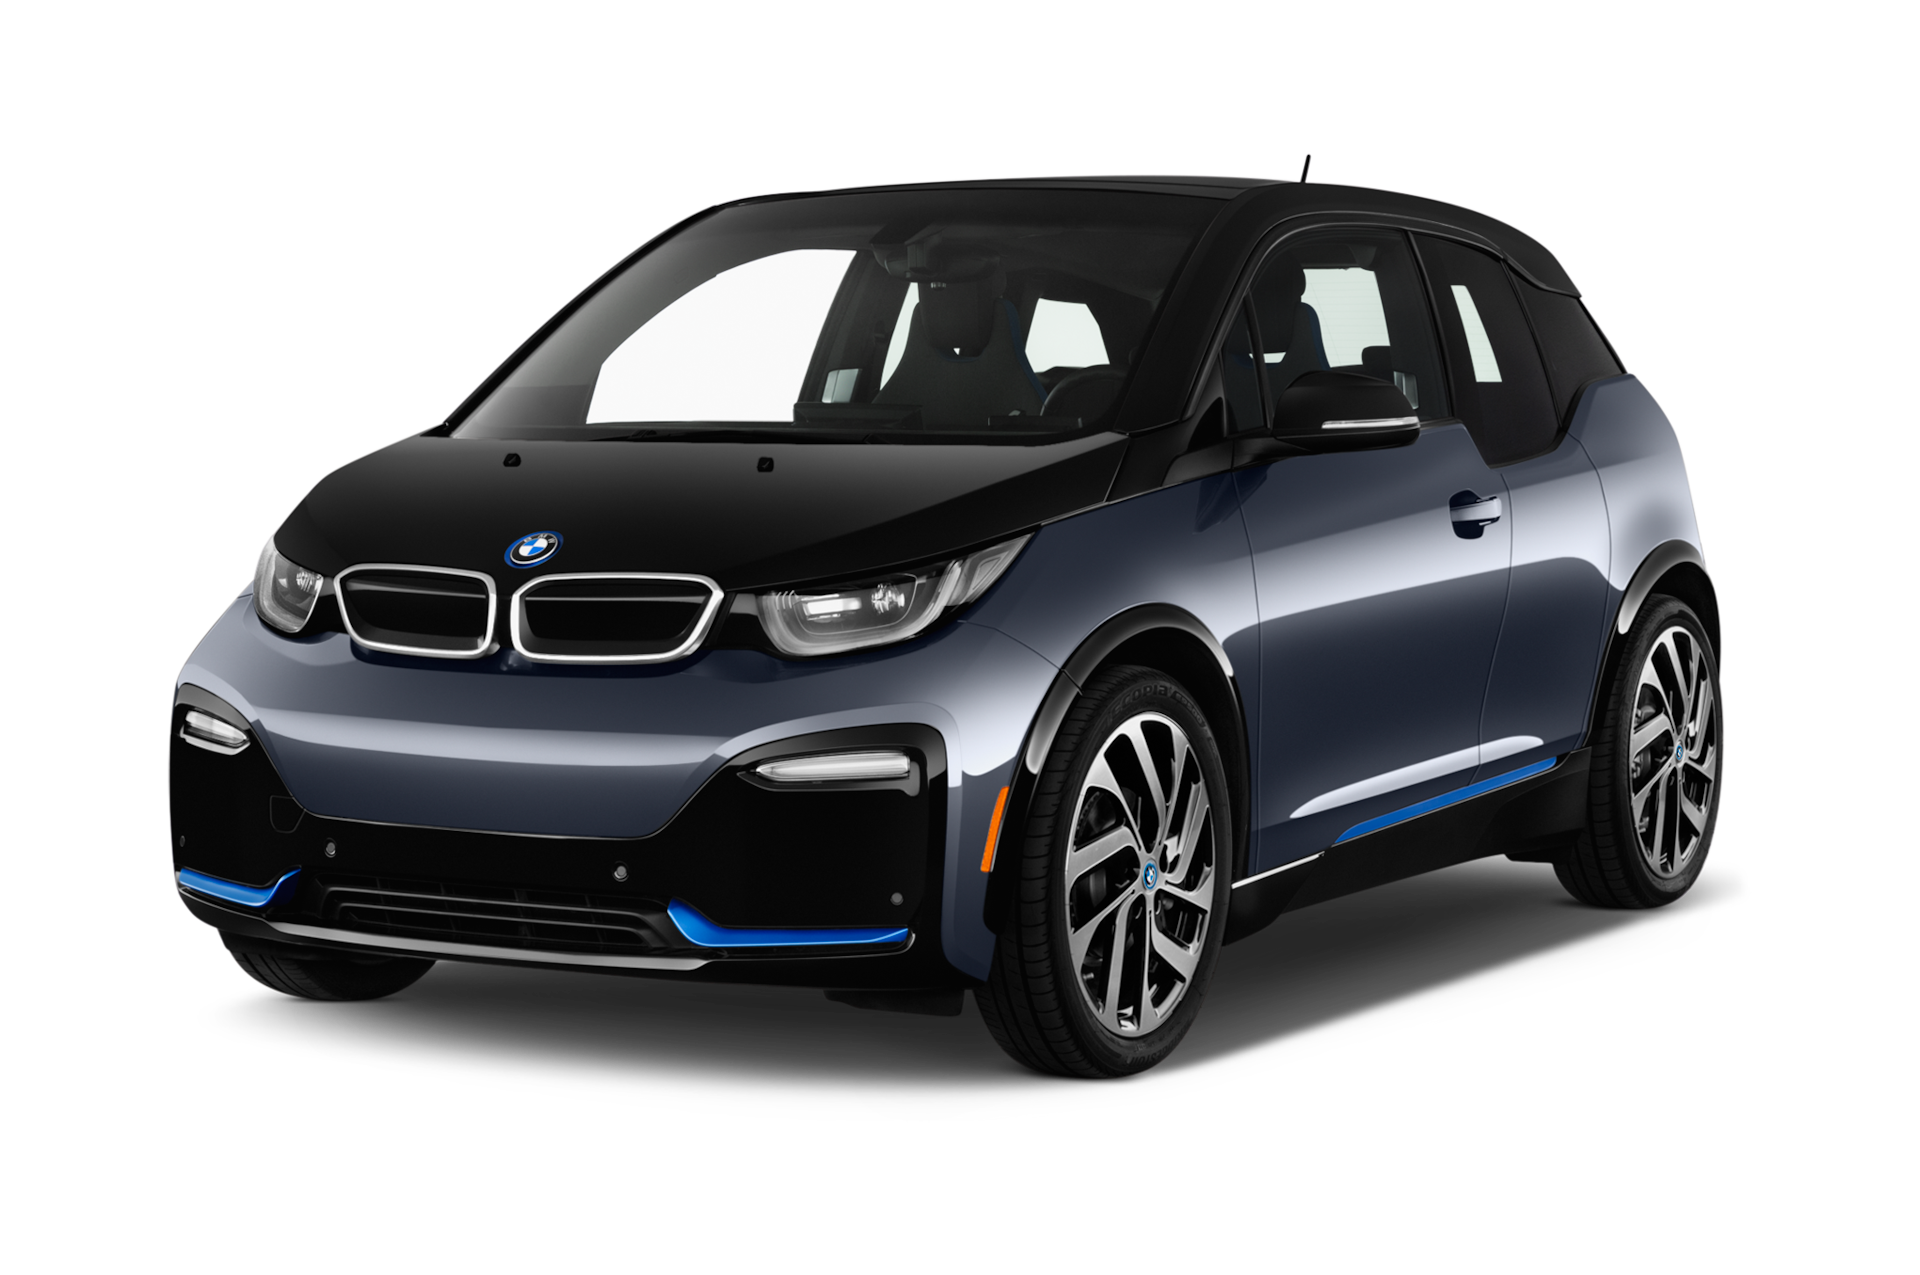 2020 BMW I3 Prices, Reviews, and Photos - MotorTrend